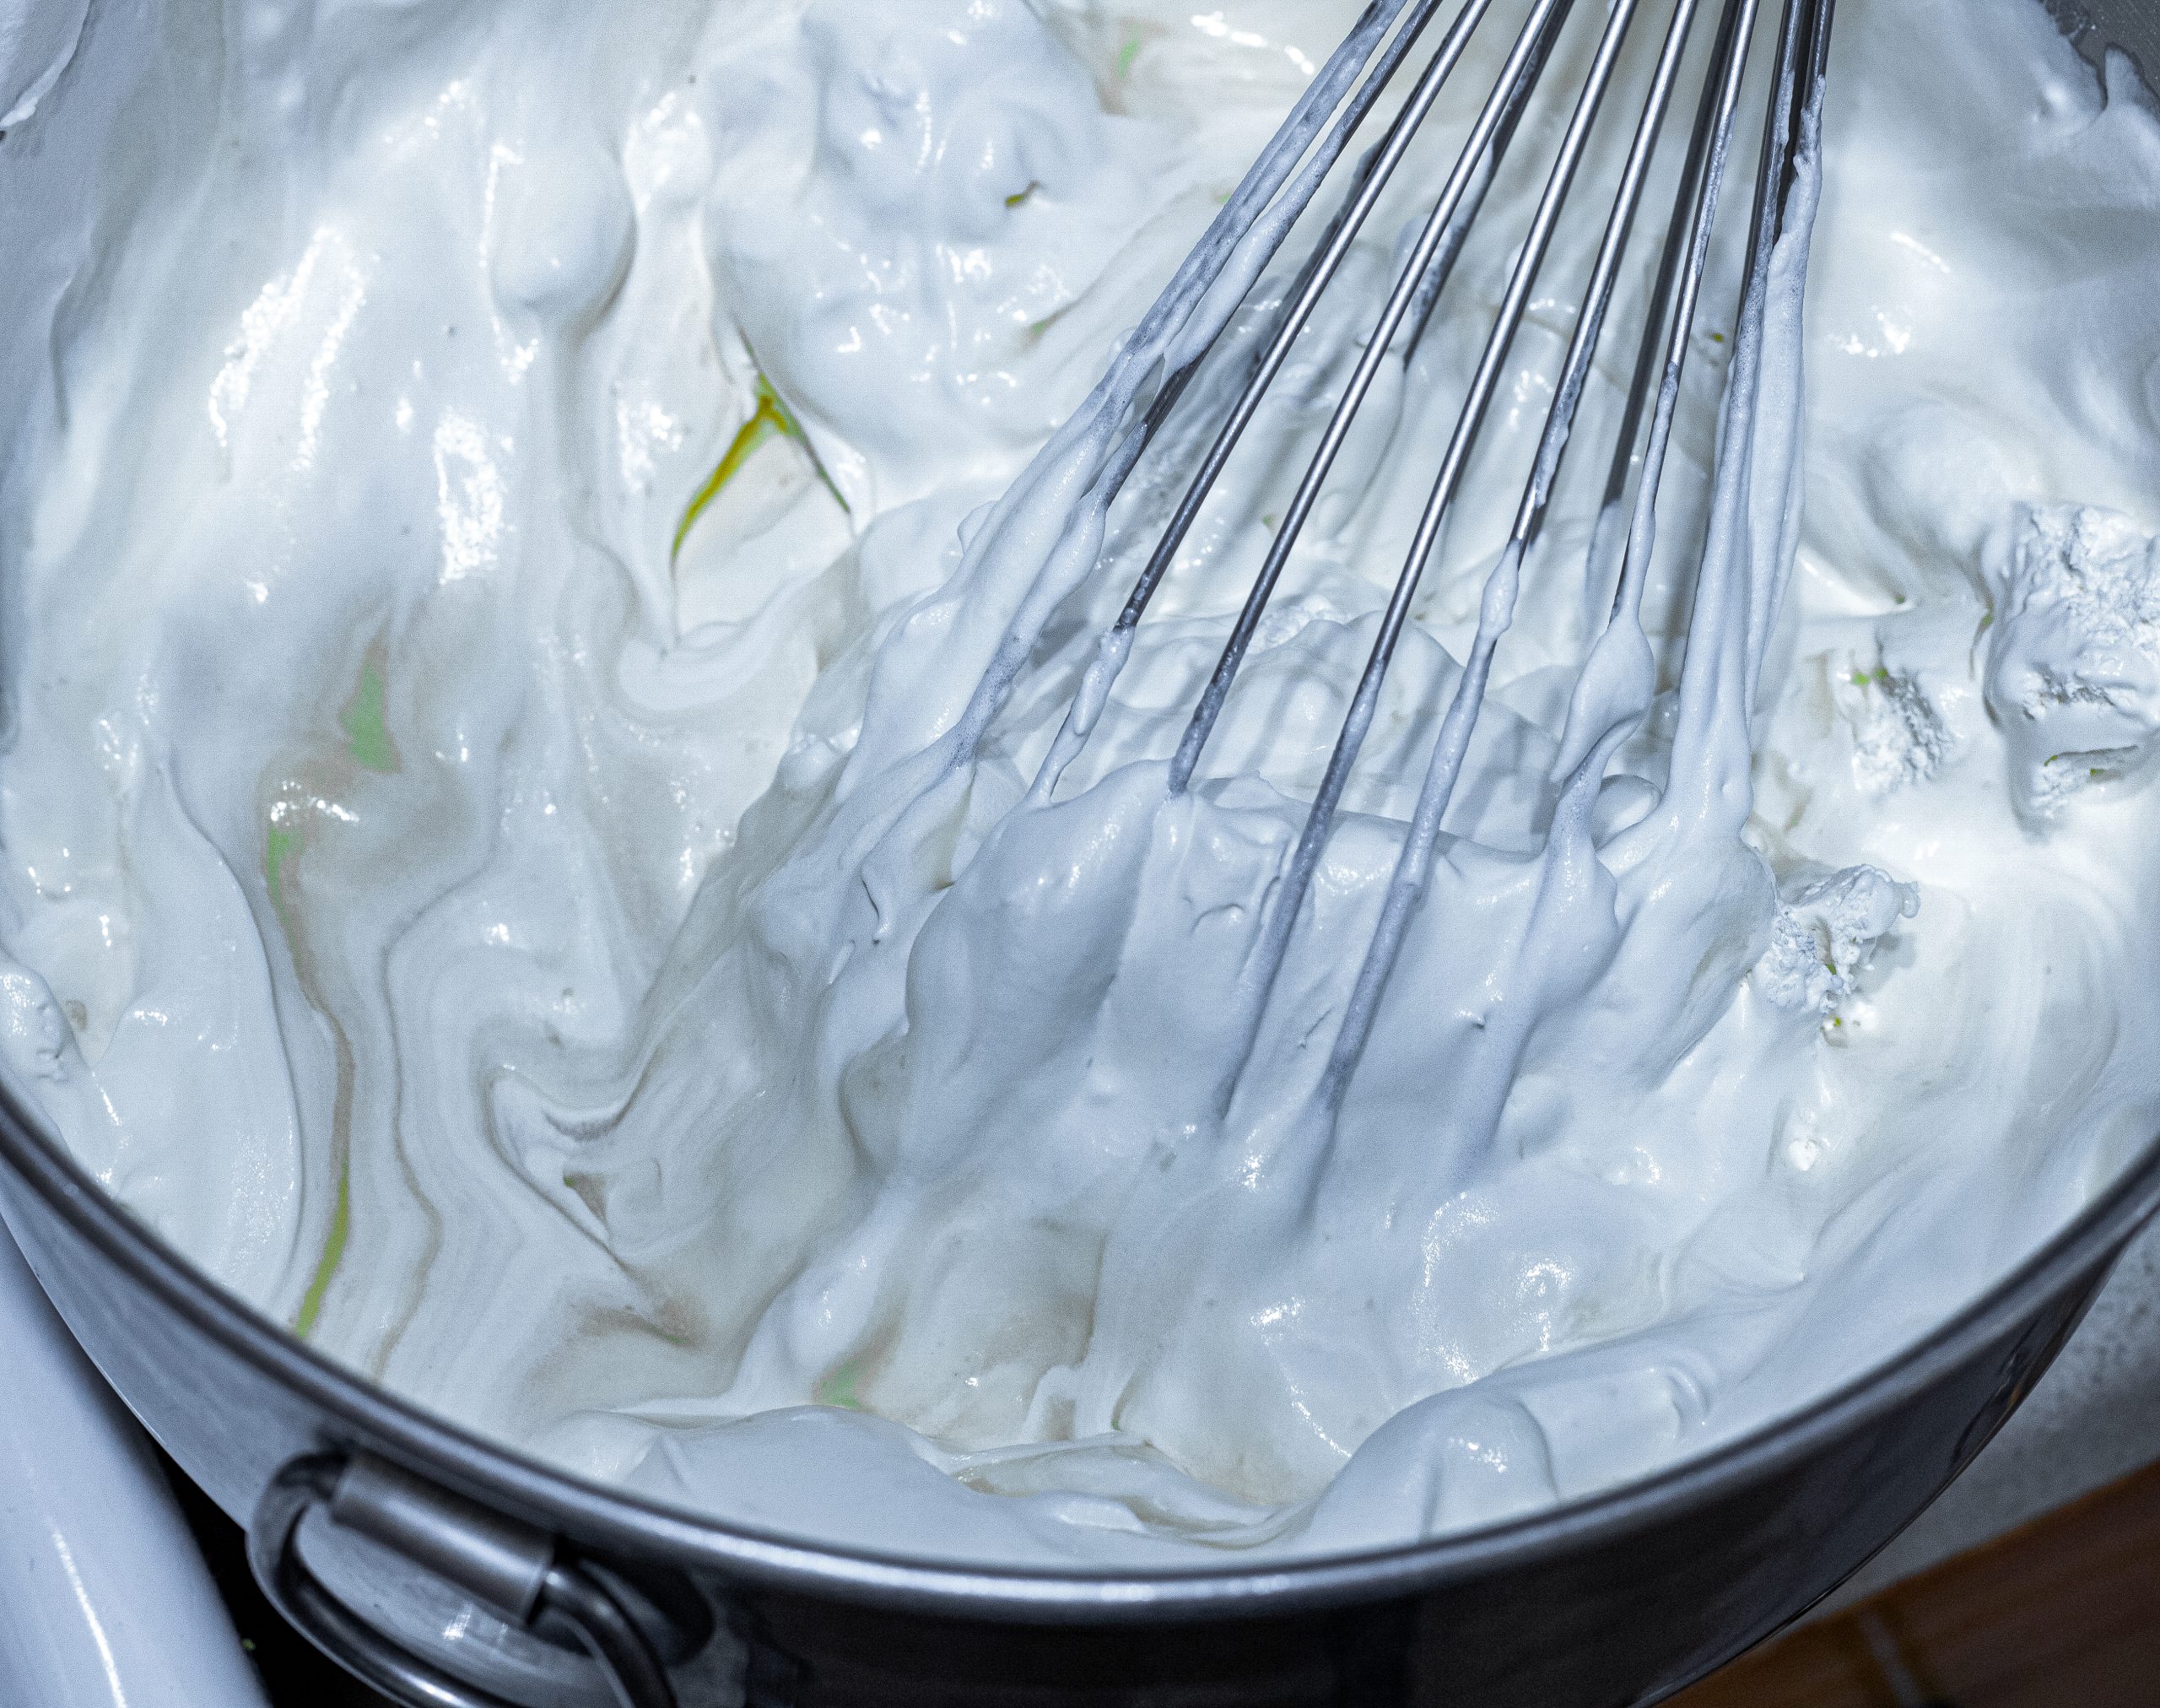 Over low heat, place the cream in a saucepan and cook until it's bubbling.